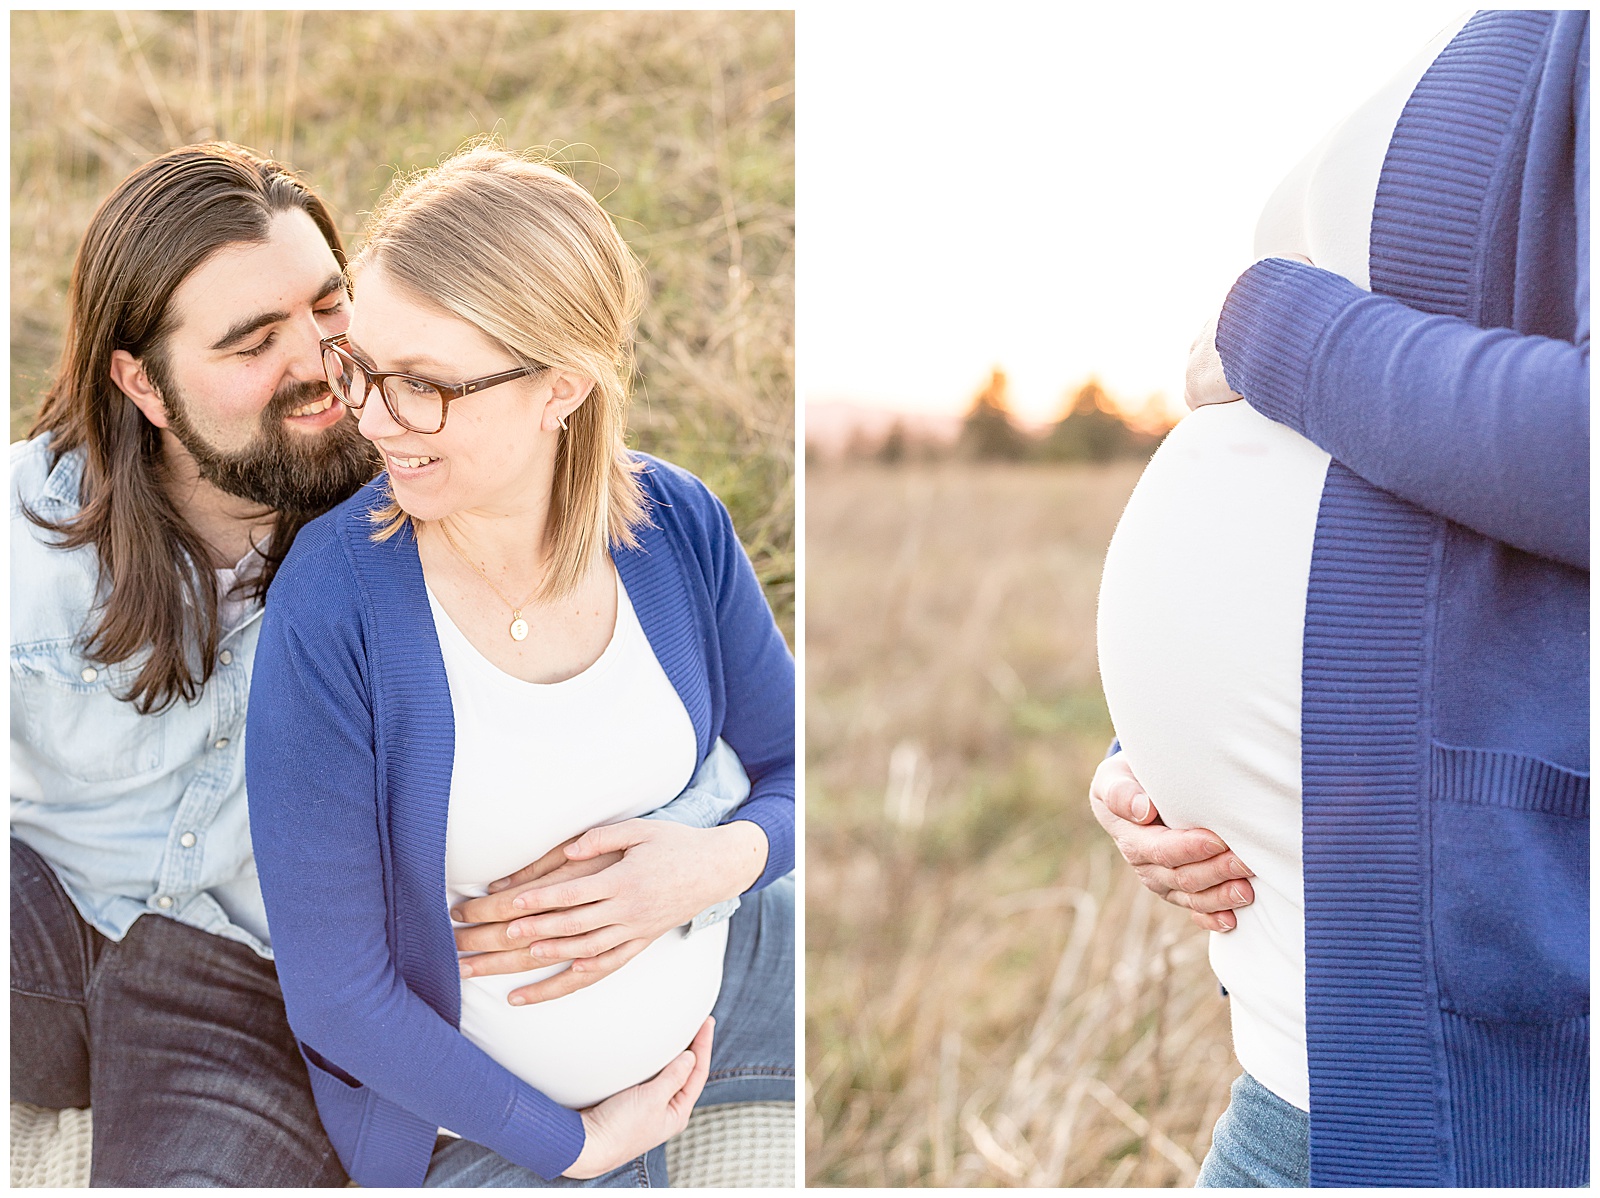 Pregnant Mom in white shirt and blue sweater, dad in denim shirt and dark jeans. 